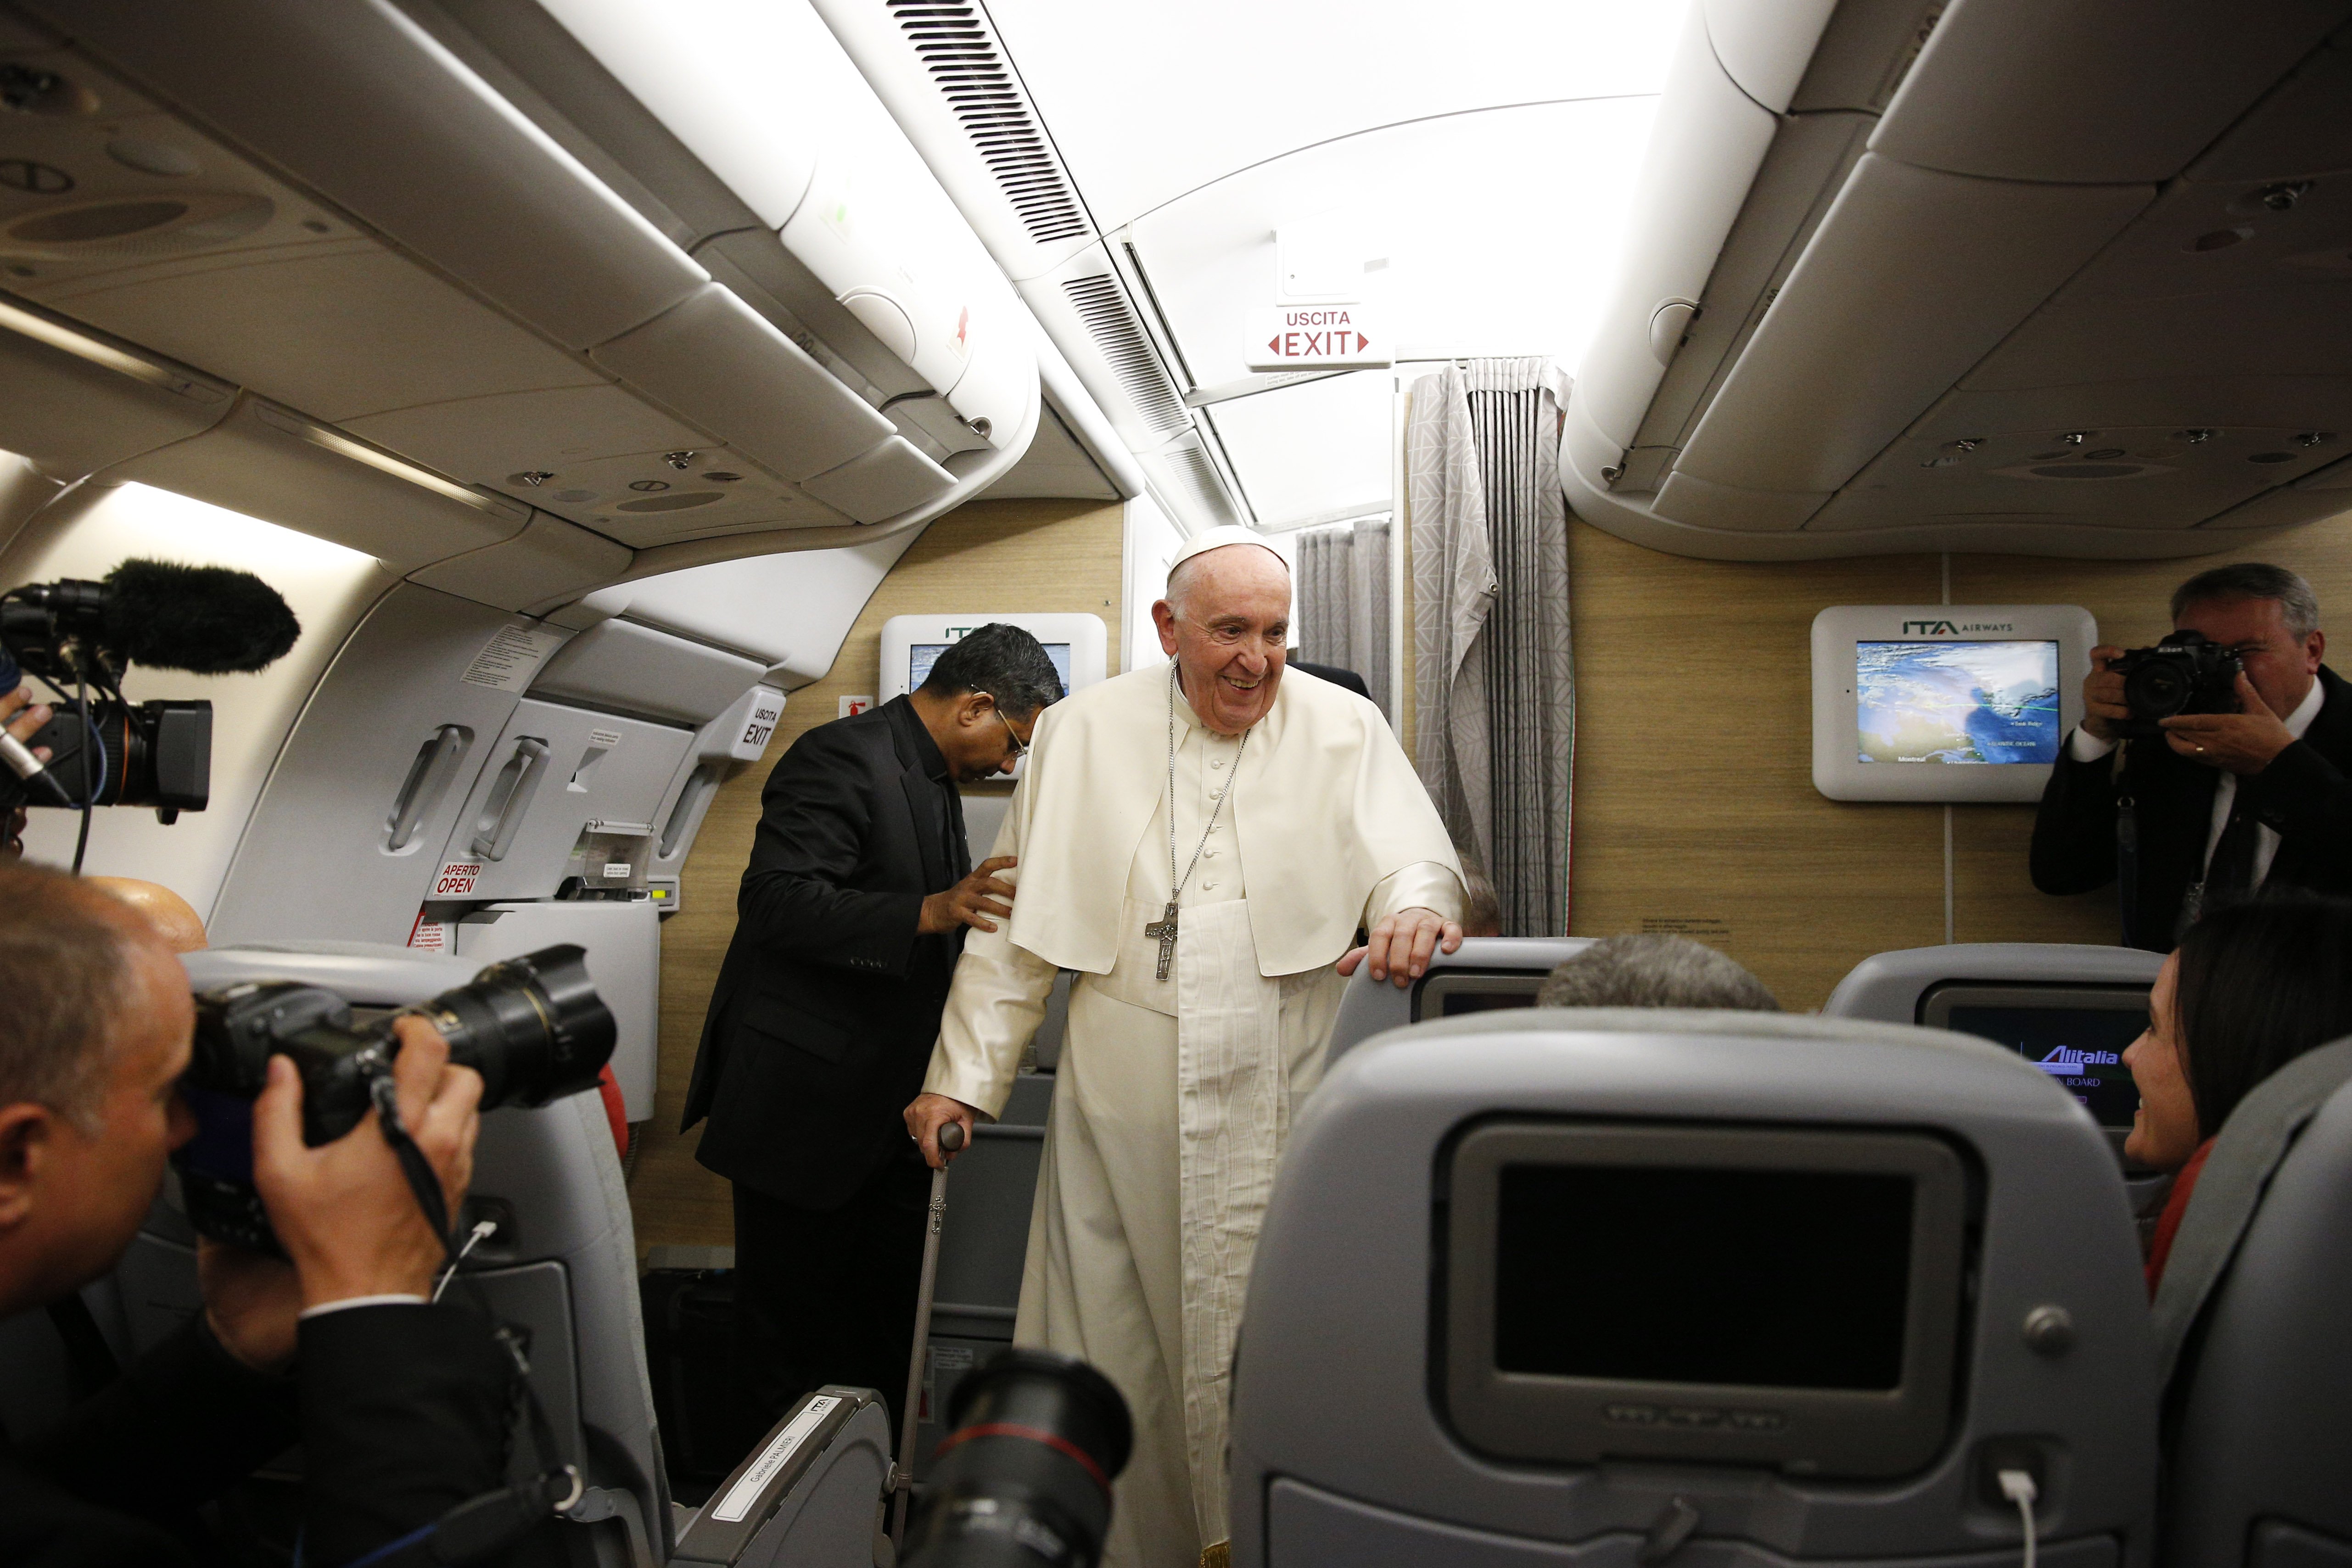 Popes On A Plane How The Boeing 747 Changed The Catholic Church And